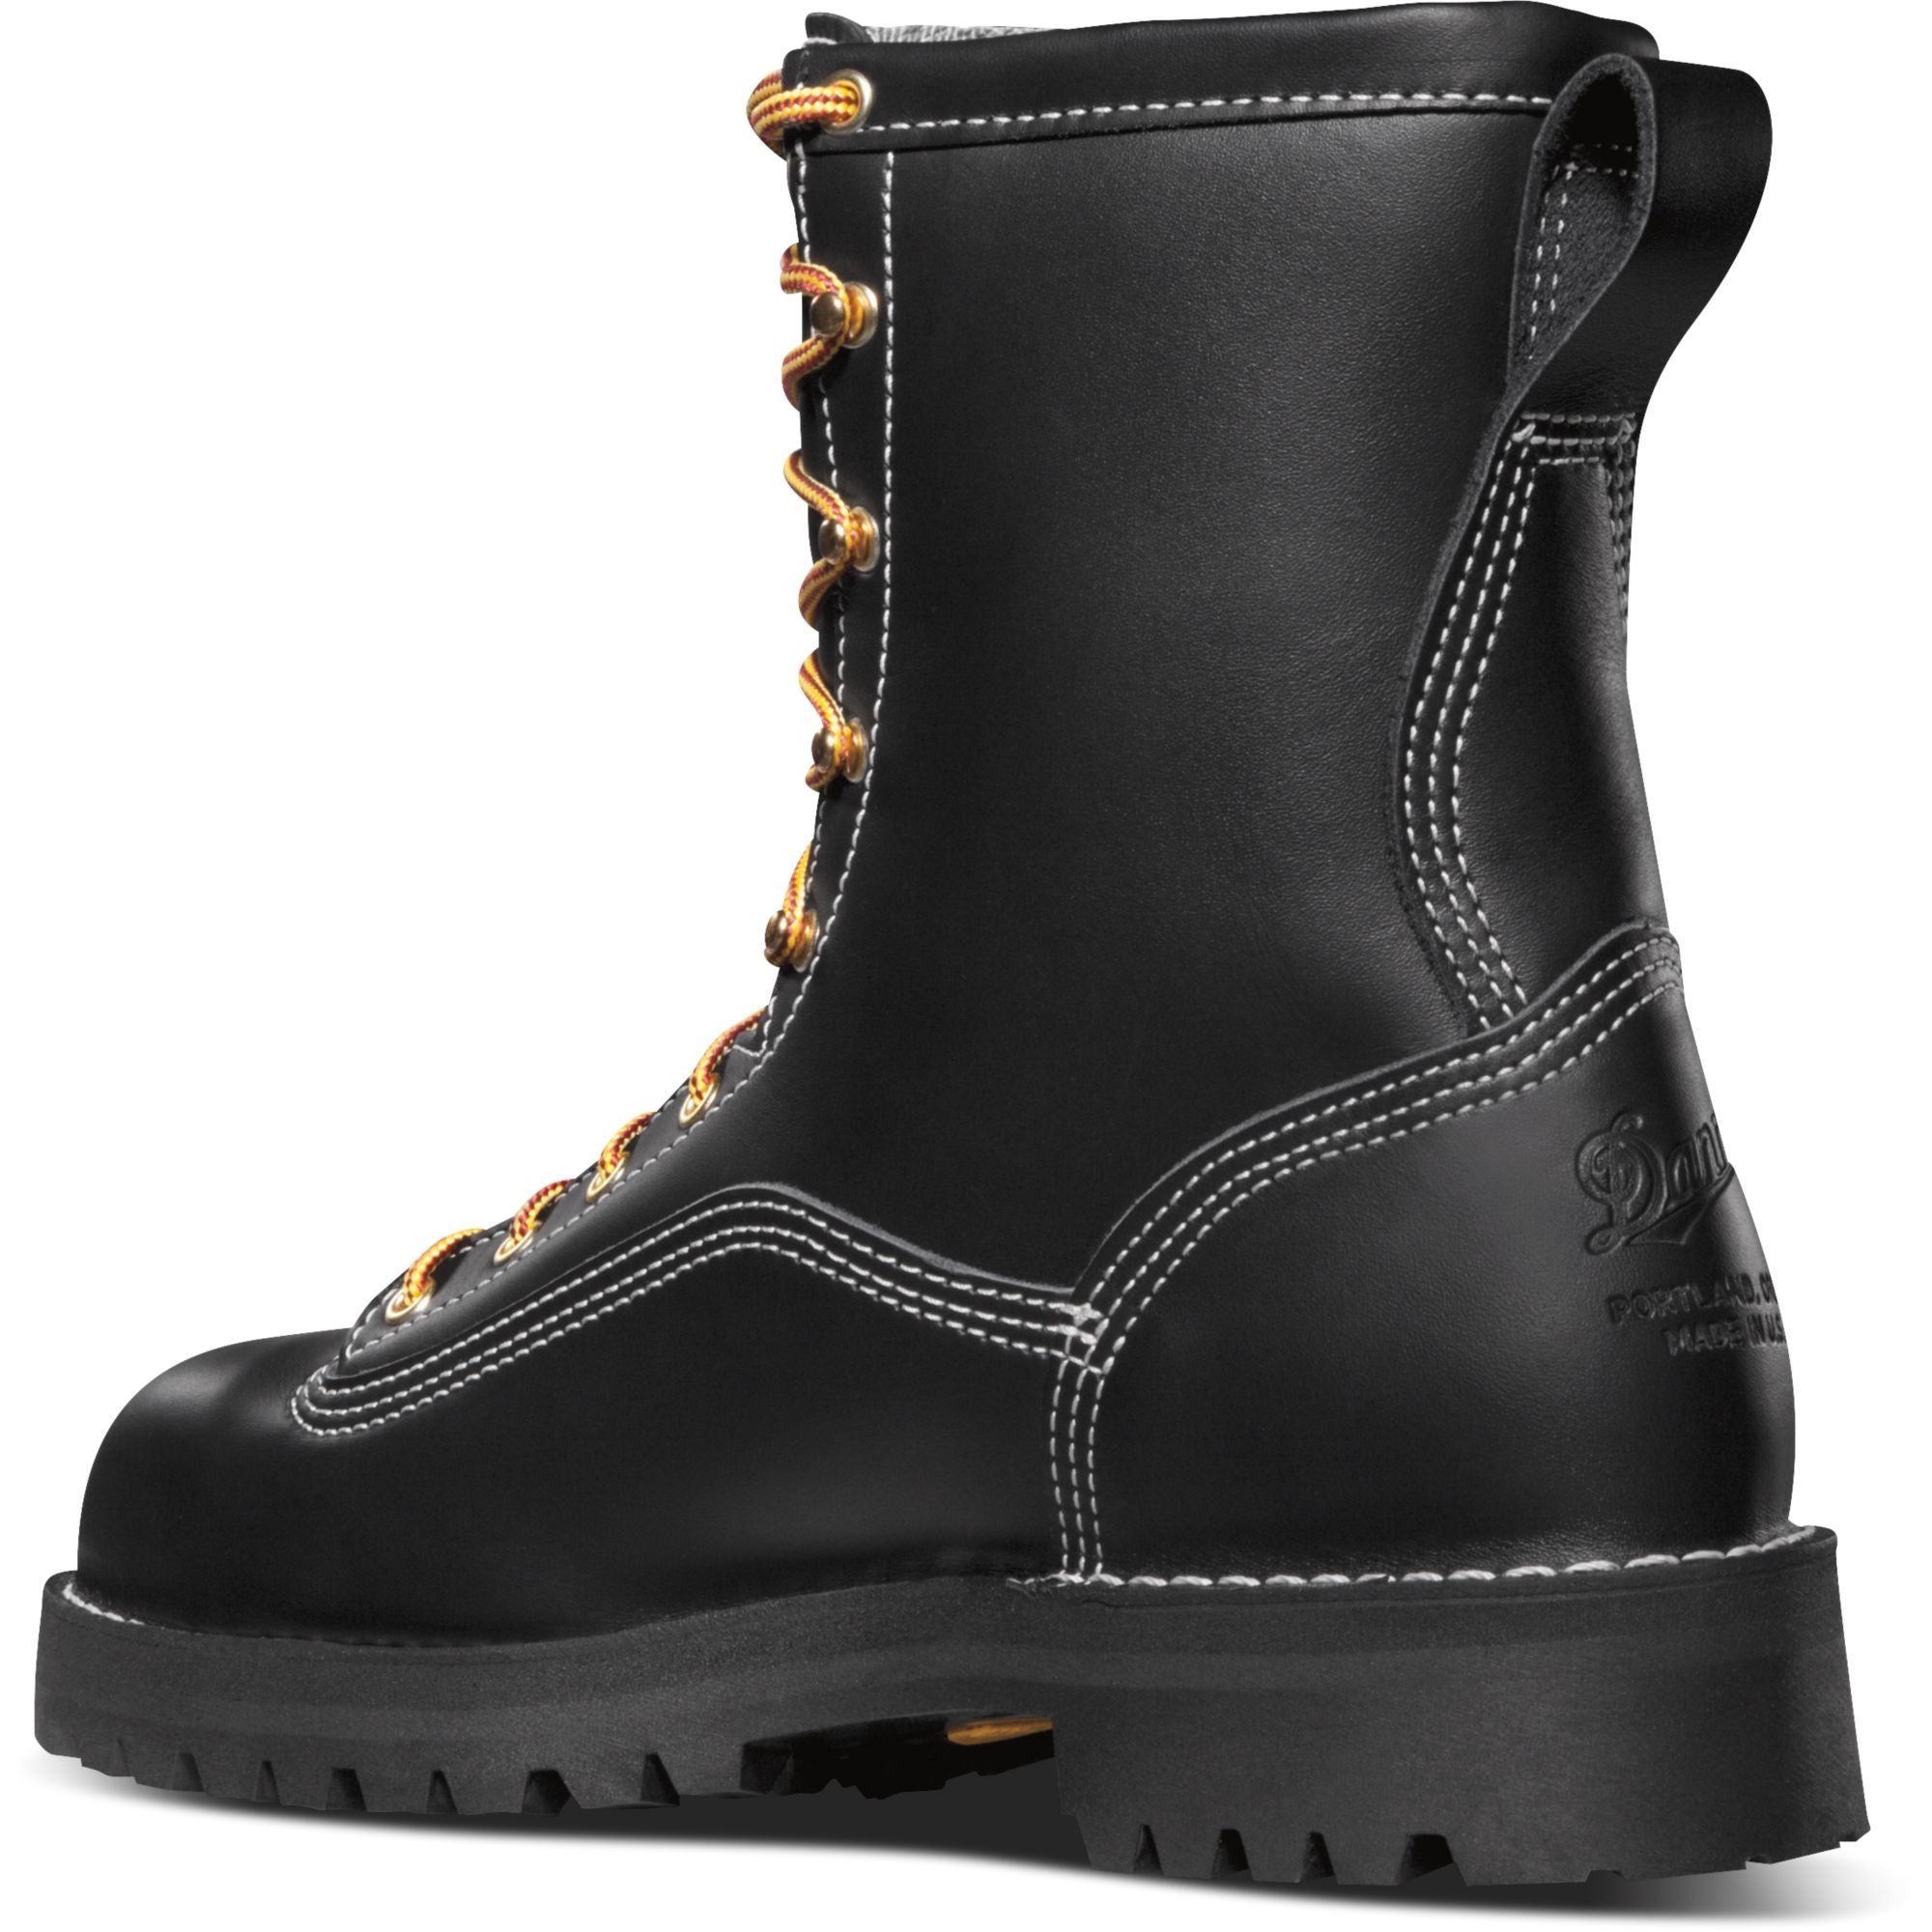 Danner Men's Rain Forest USA Made 8" Insulated WP Work Boot Black 11700  - Overlook Boots